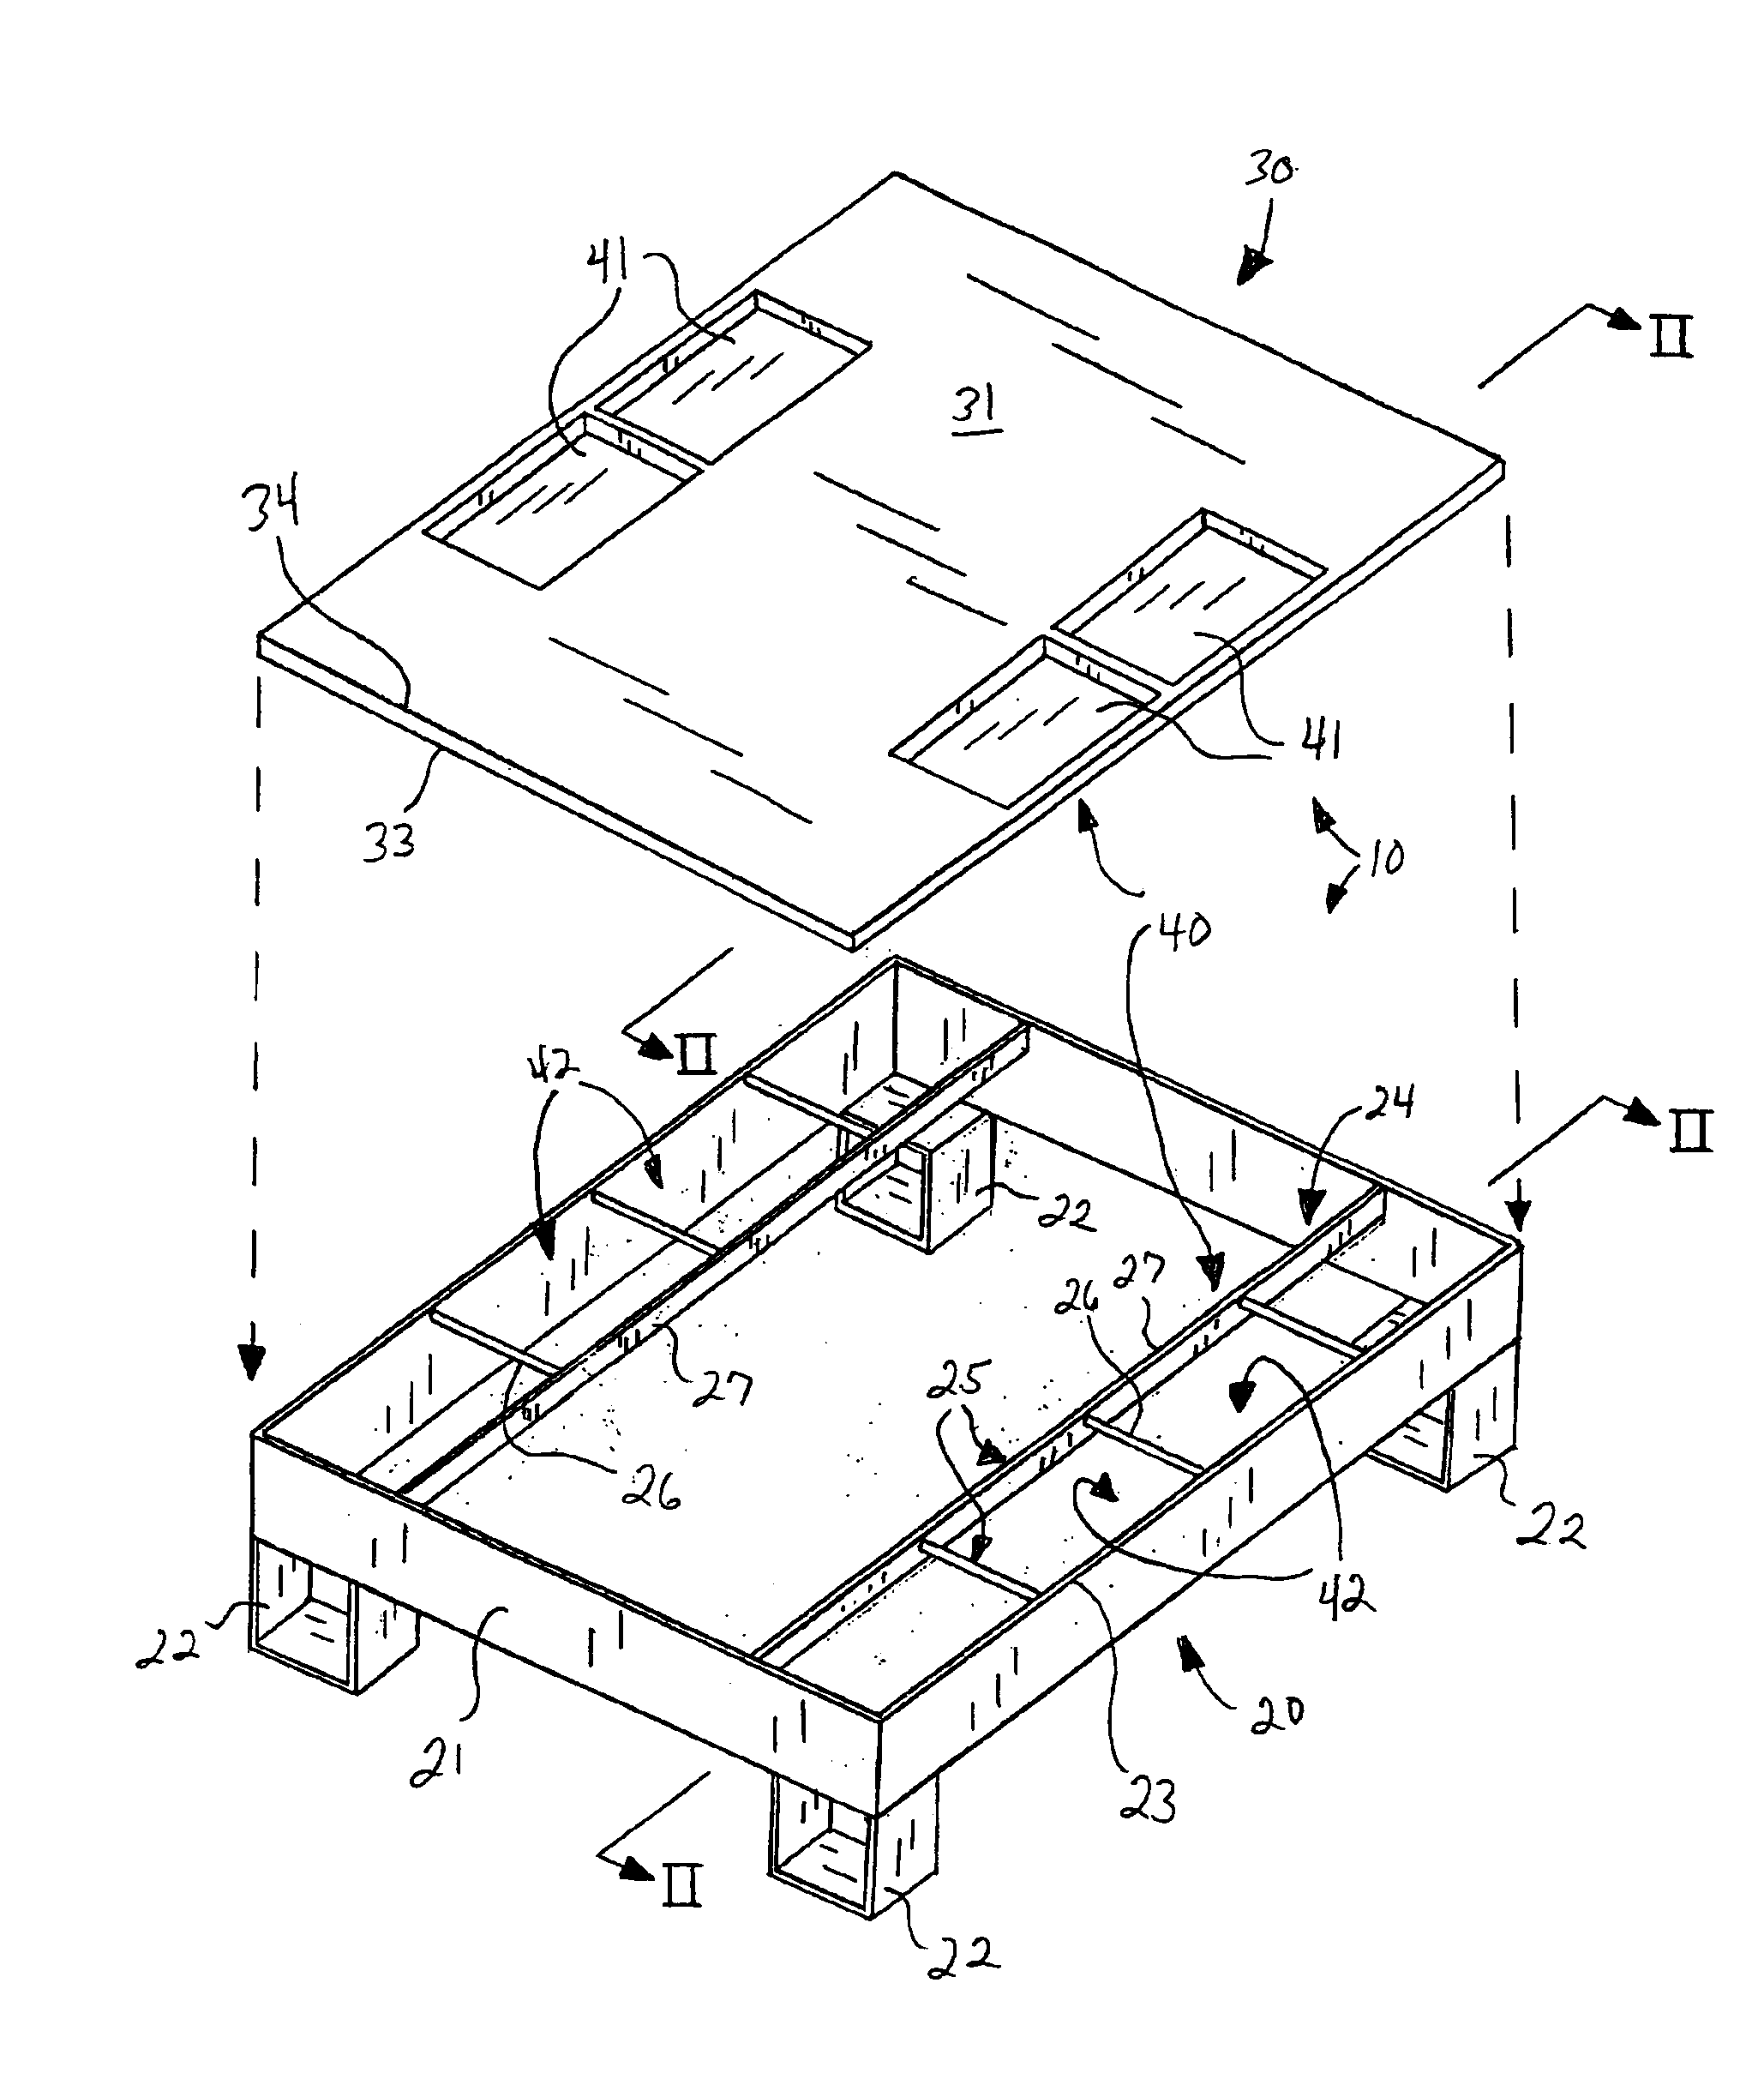 Metal and plastic pallet assembly